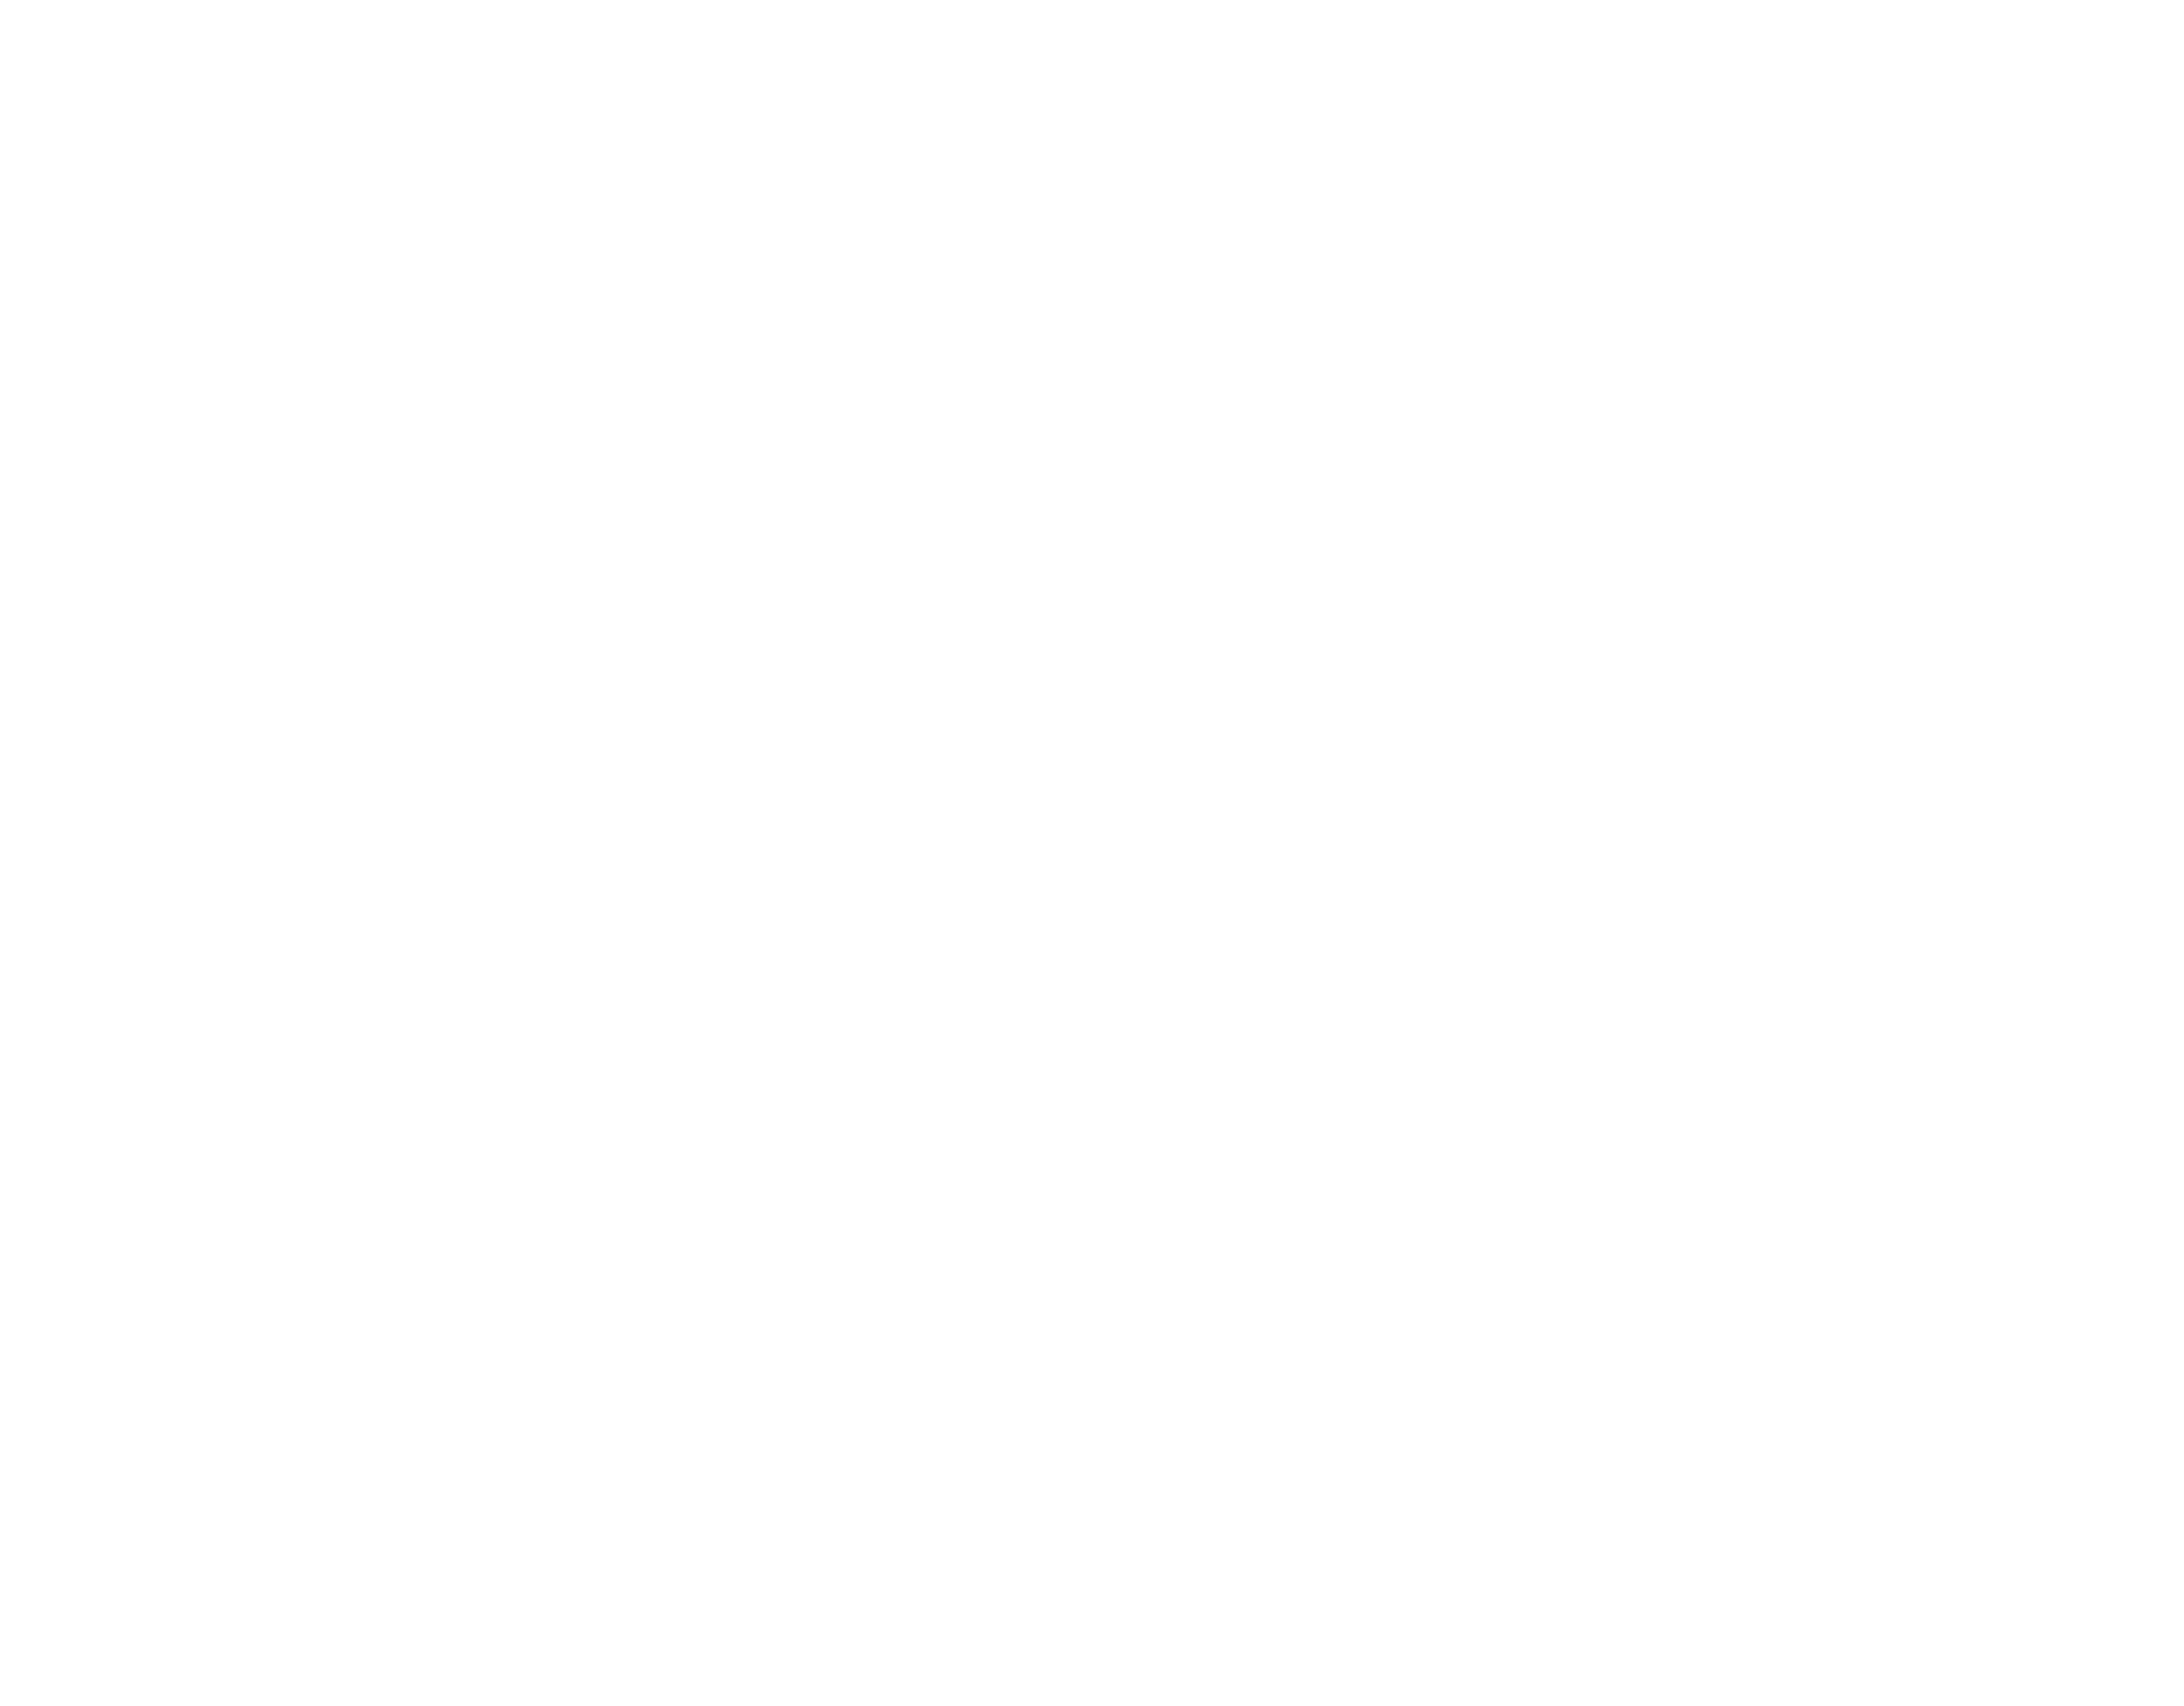 Wellesley Voices for Disability 